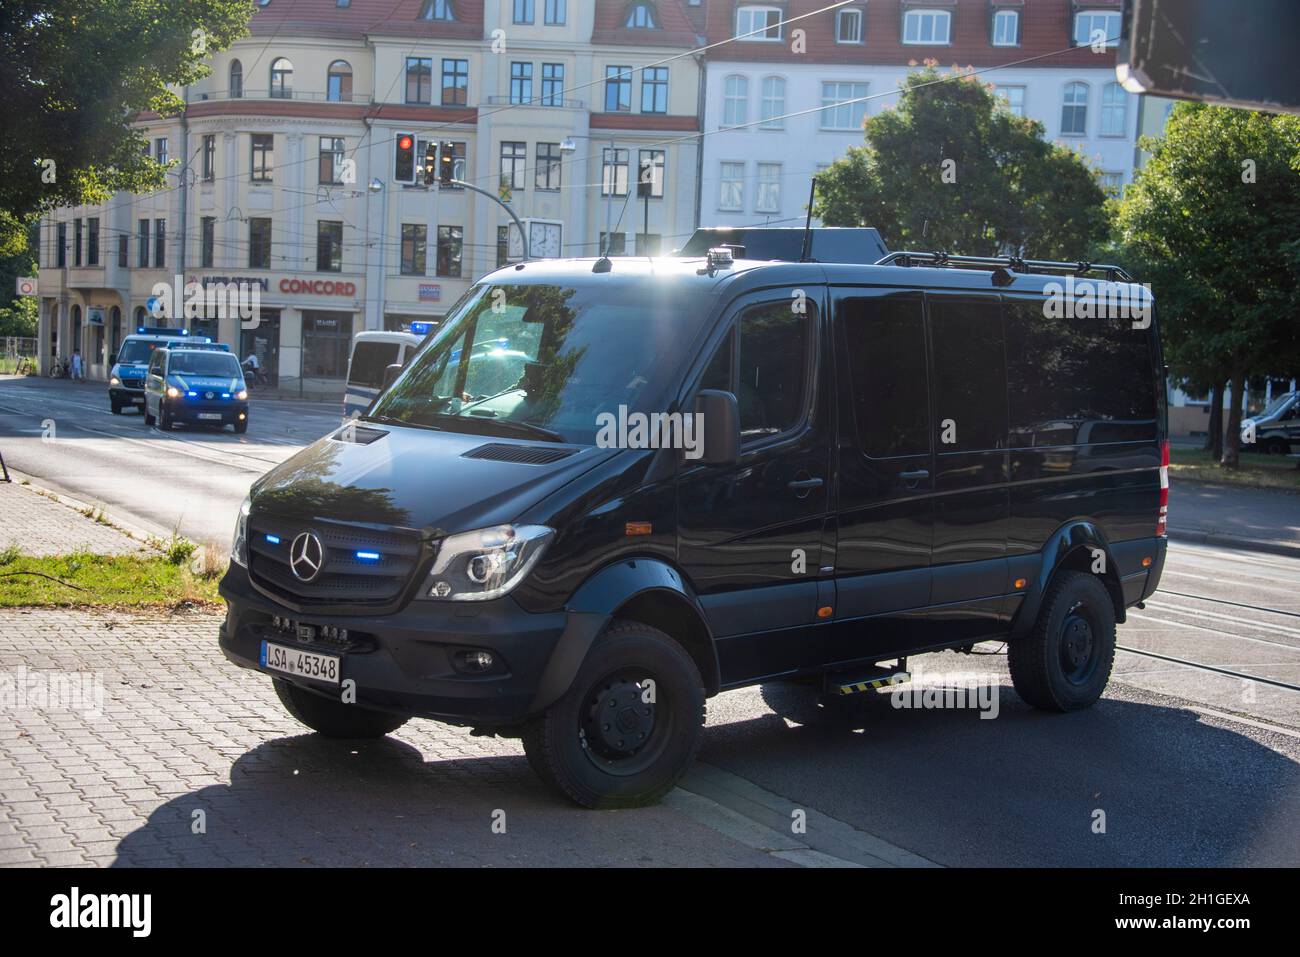 Germany, Saxony-Anhalt, Magdeburg, 22 July 2020: A police escort brings the accused right-wing terrorist Stephan B. into the courtyard of the court bu Stock Photo